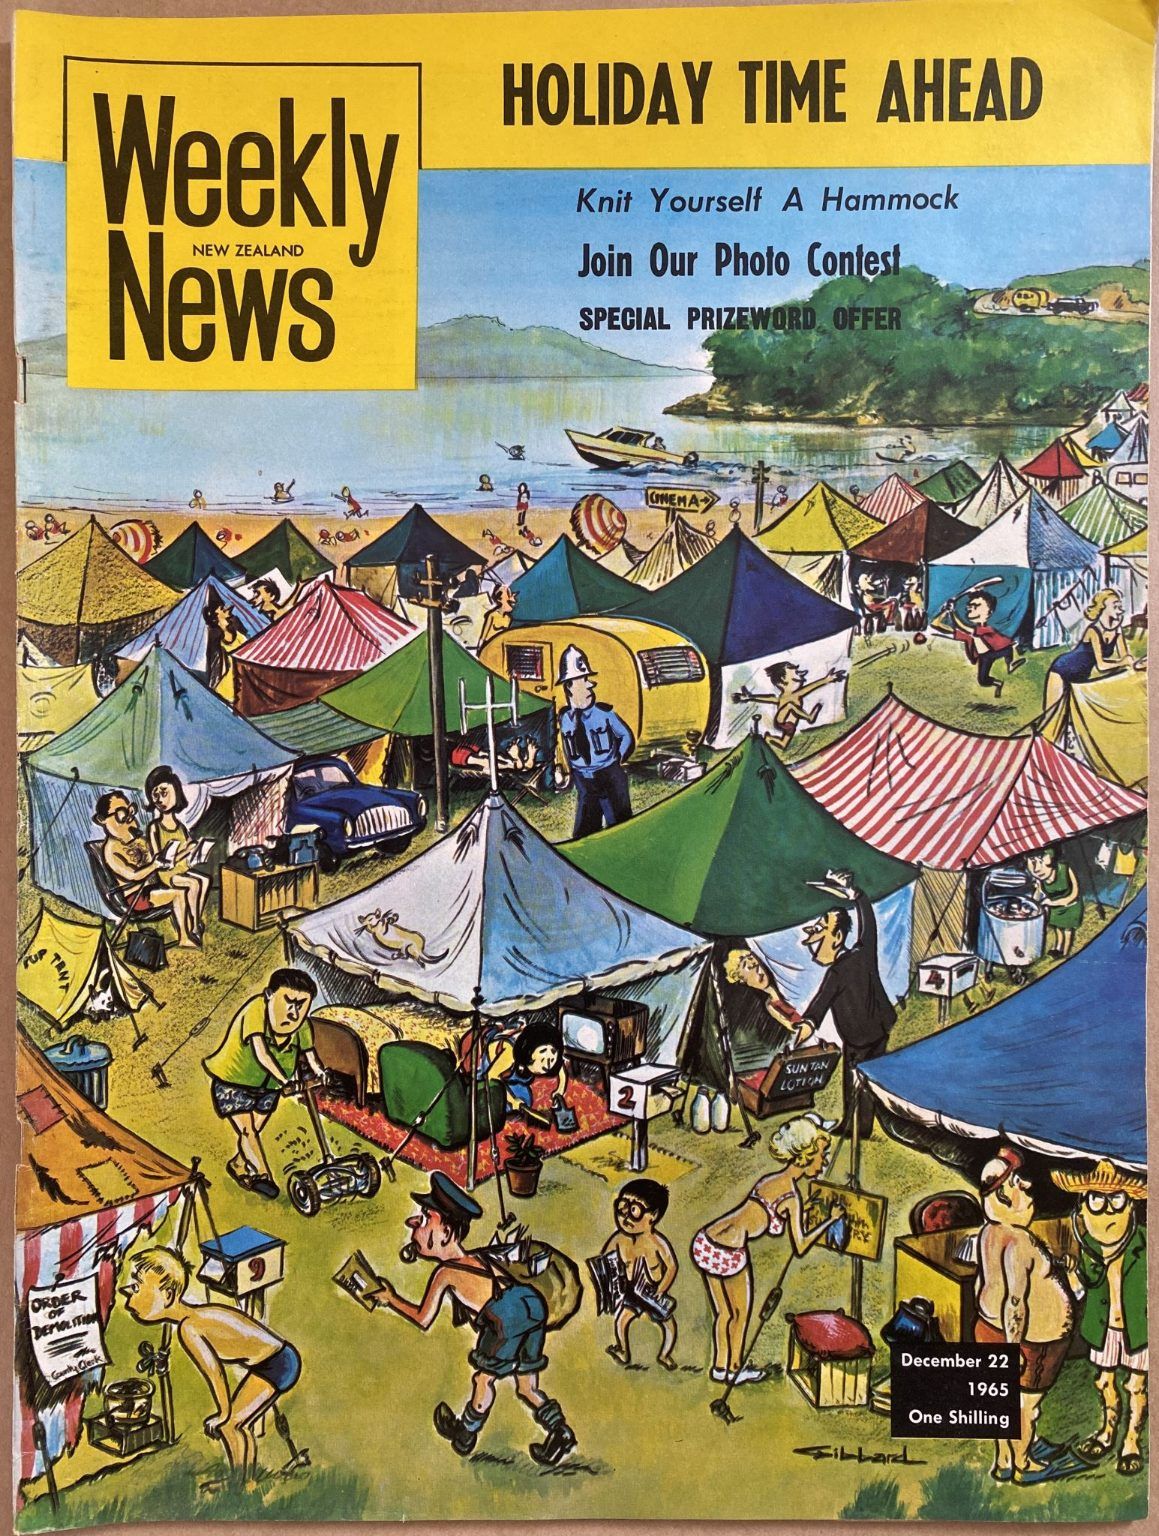 OLD NEWSPAPER: New Zealand Weekly News, No. 5326, 22 December 1965